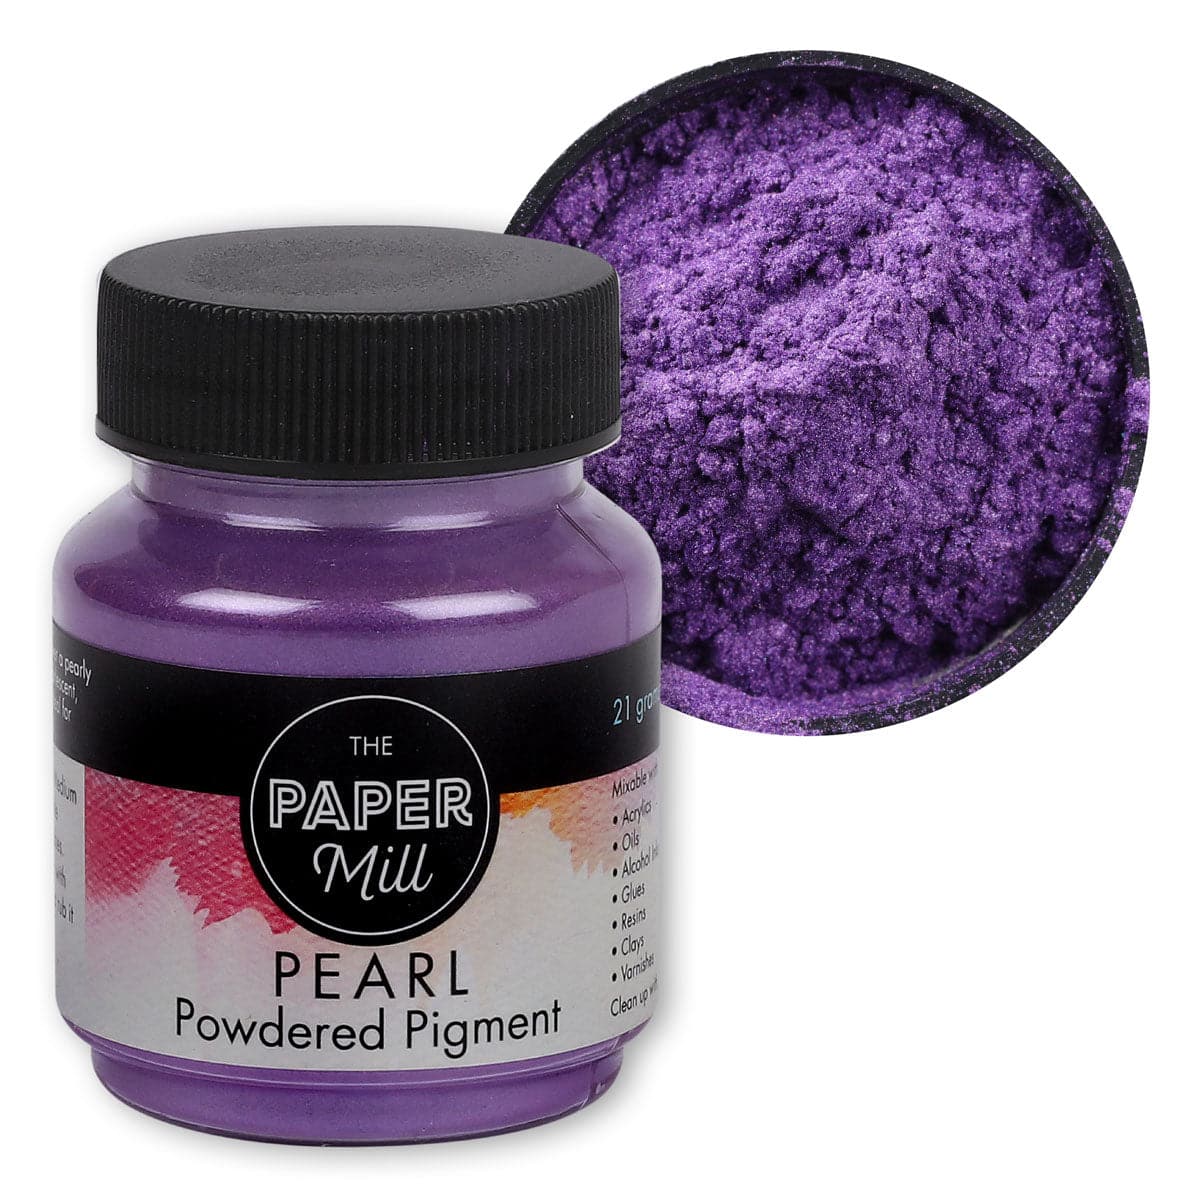 Image of The Paper Mill Pearl Powdered Pigment Reflex Violet 21g